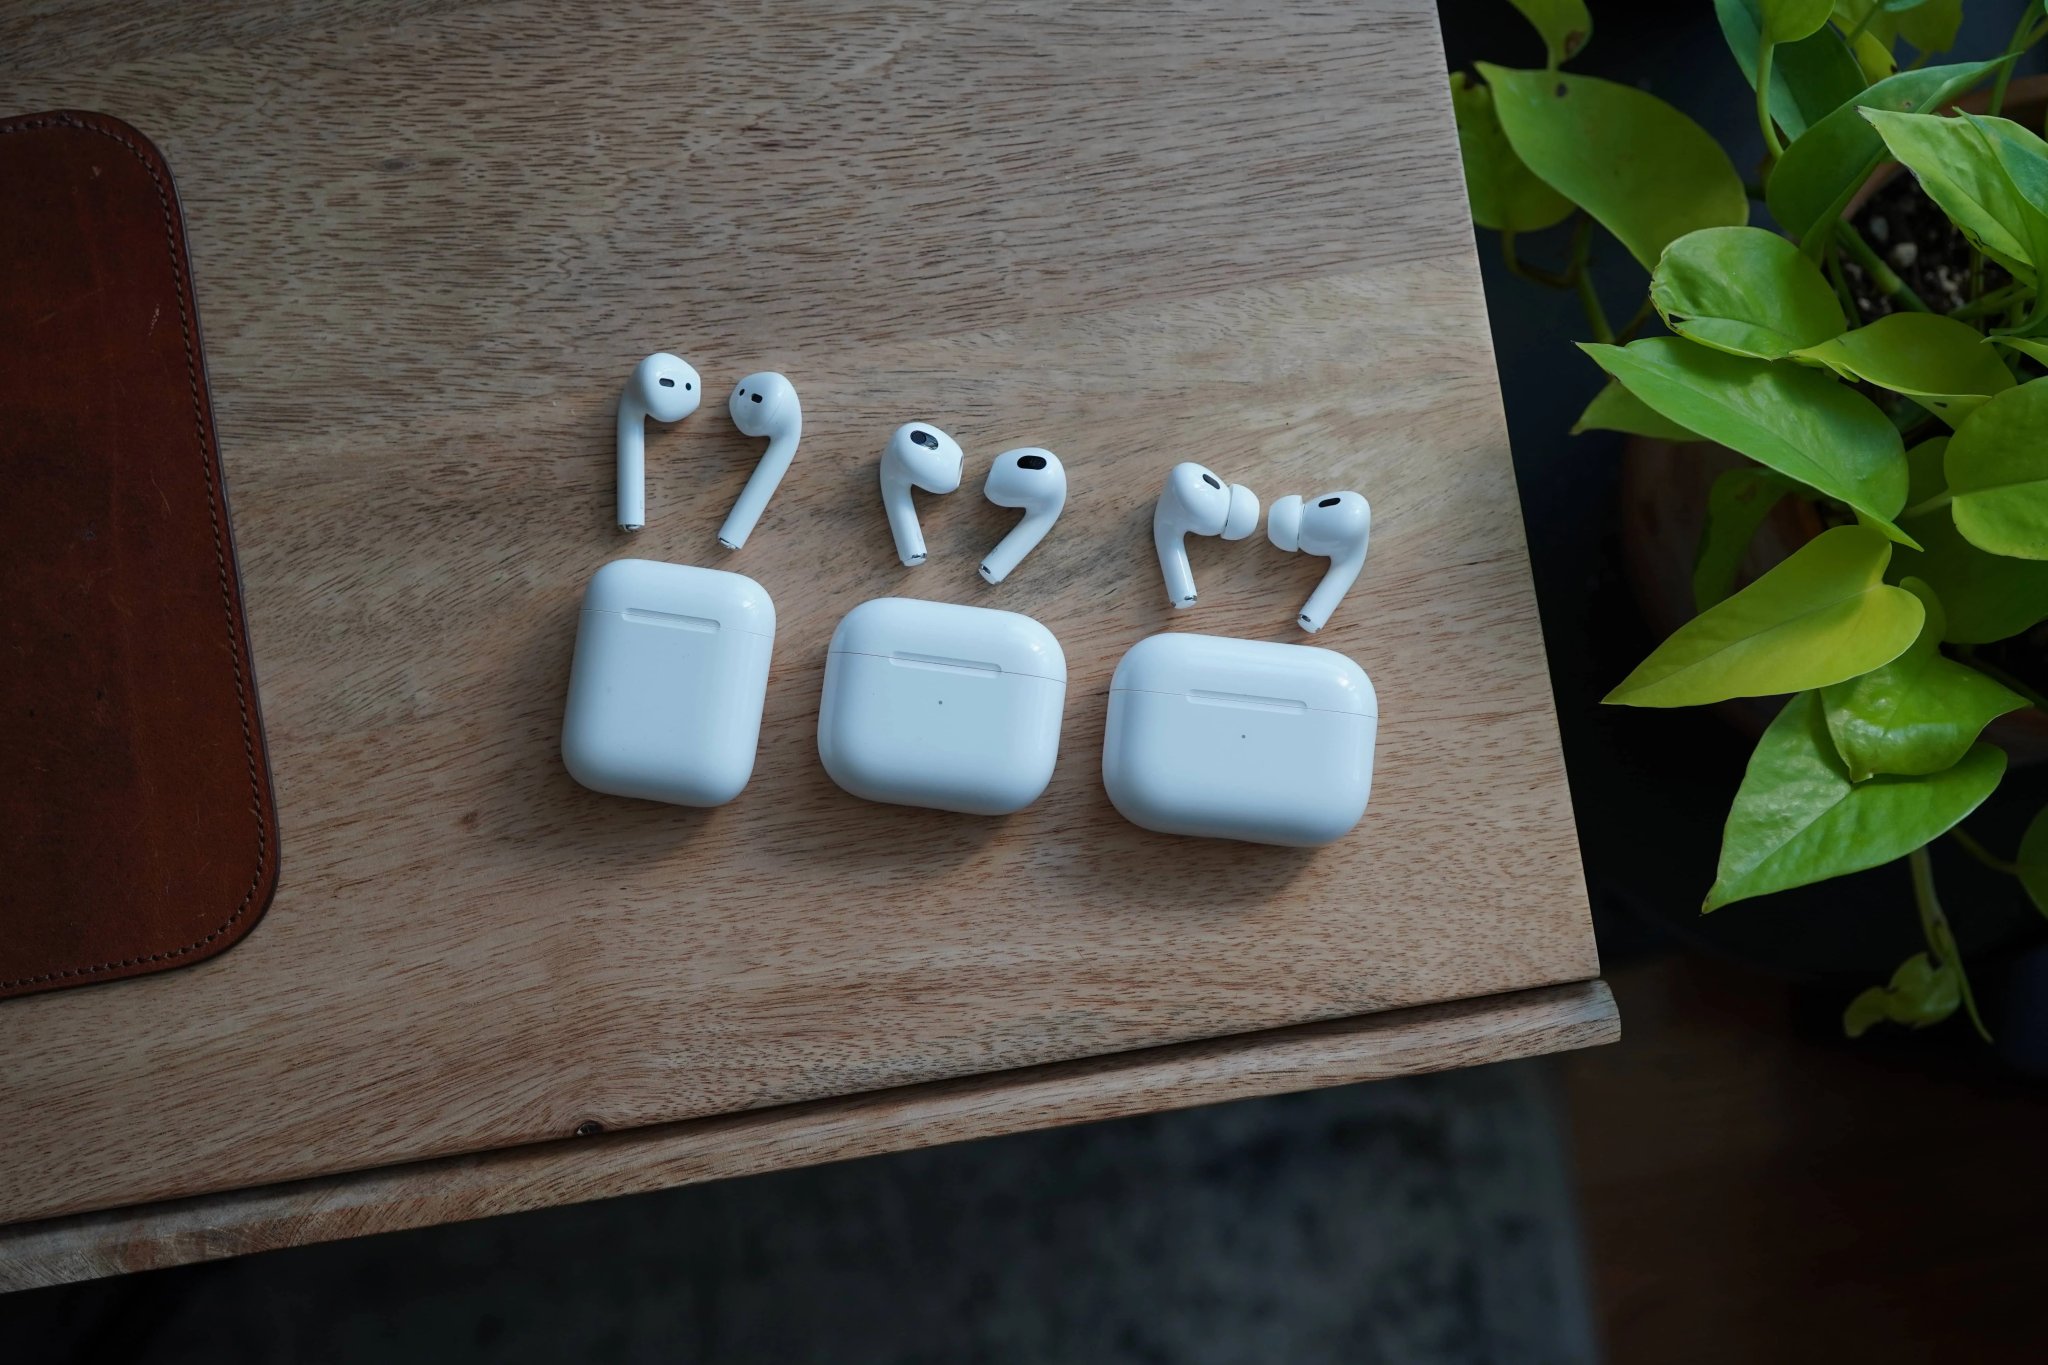 Apple Makes 3 Different Types of AirPods. Which Should You Buy?